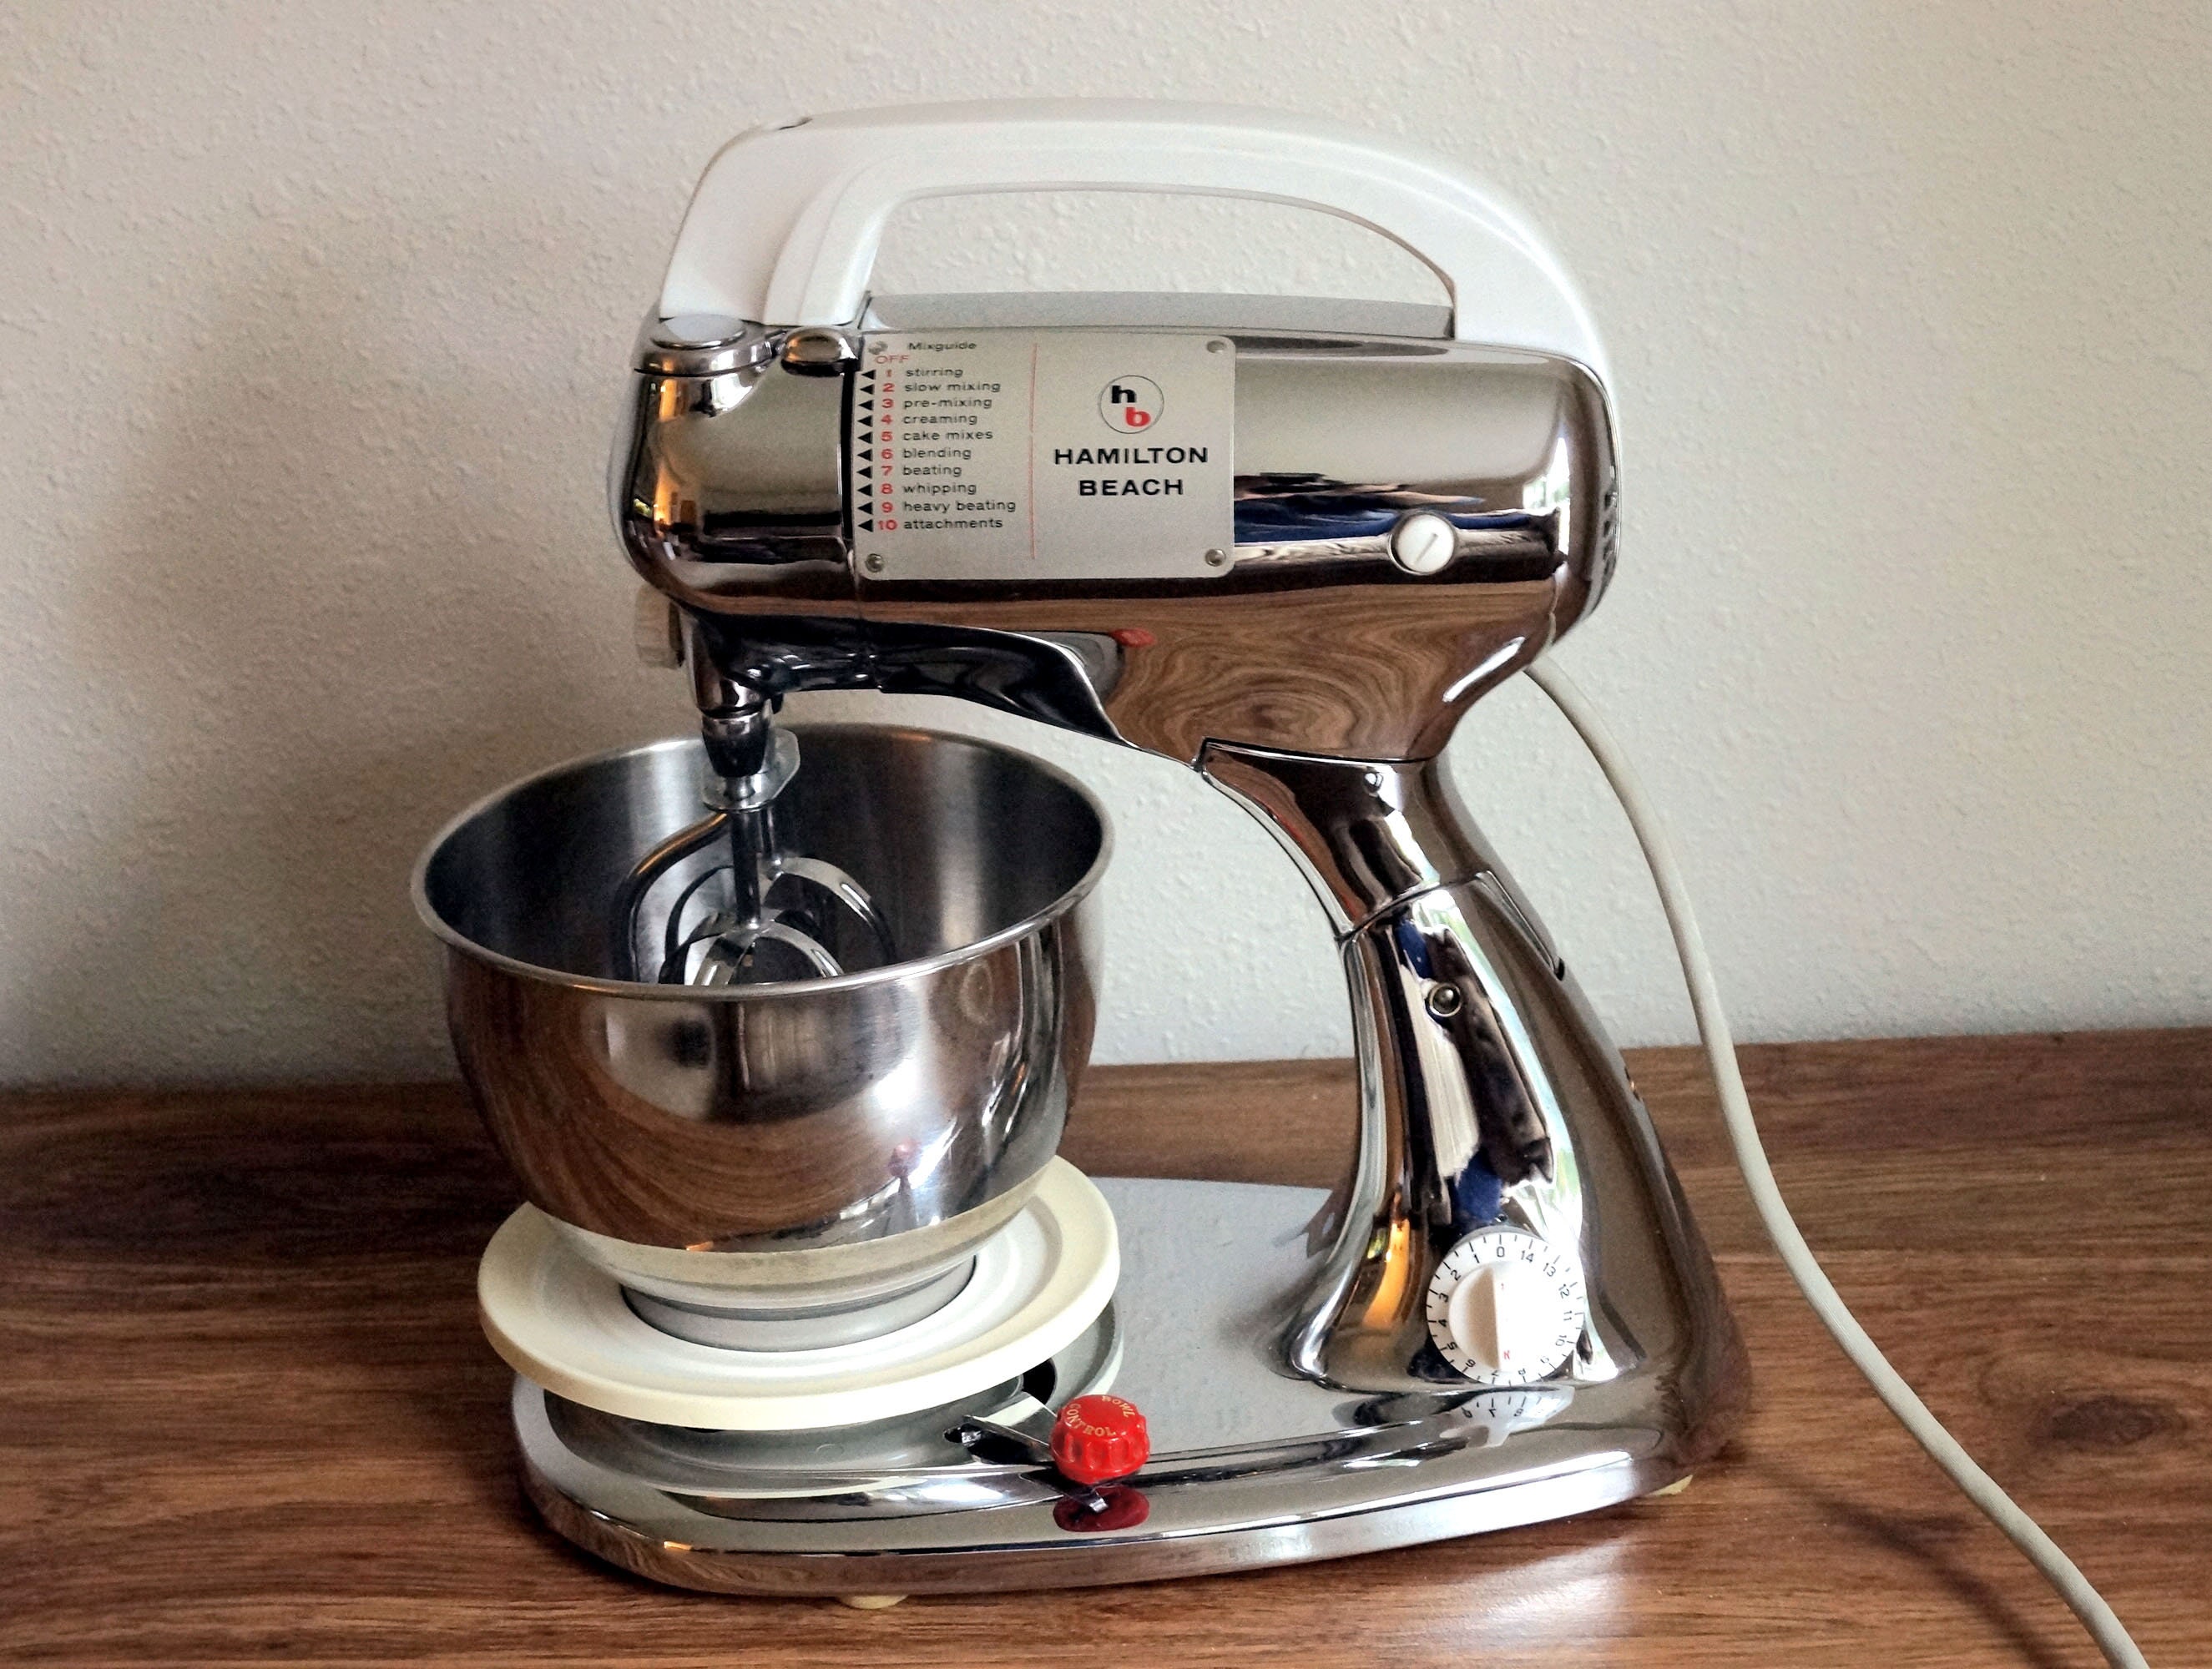 Vintage 1950's Kitchen Hamilton Beech Stand Mixer WORKING, Excellent Chrome  & White MCM 10 Speed Mixer With Timer, 2 Bowls Beaters, Gift 